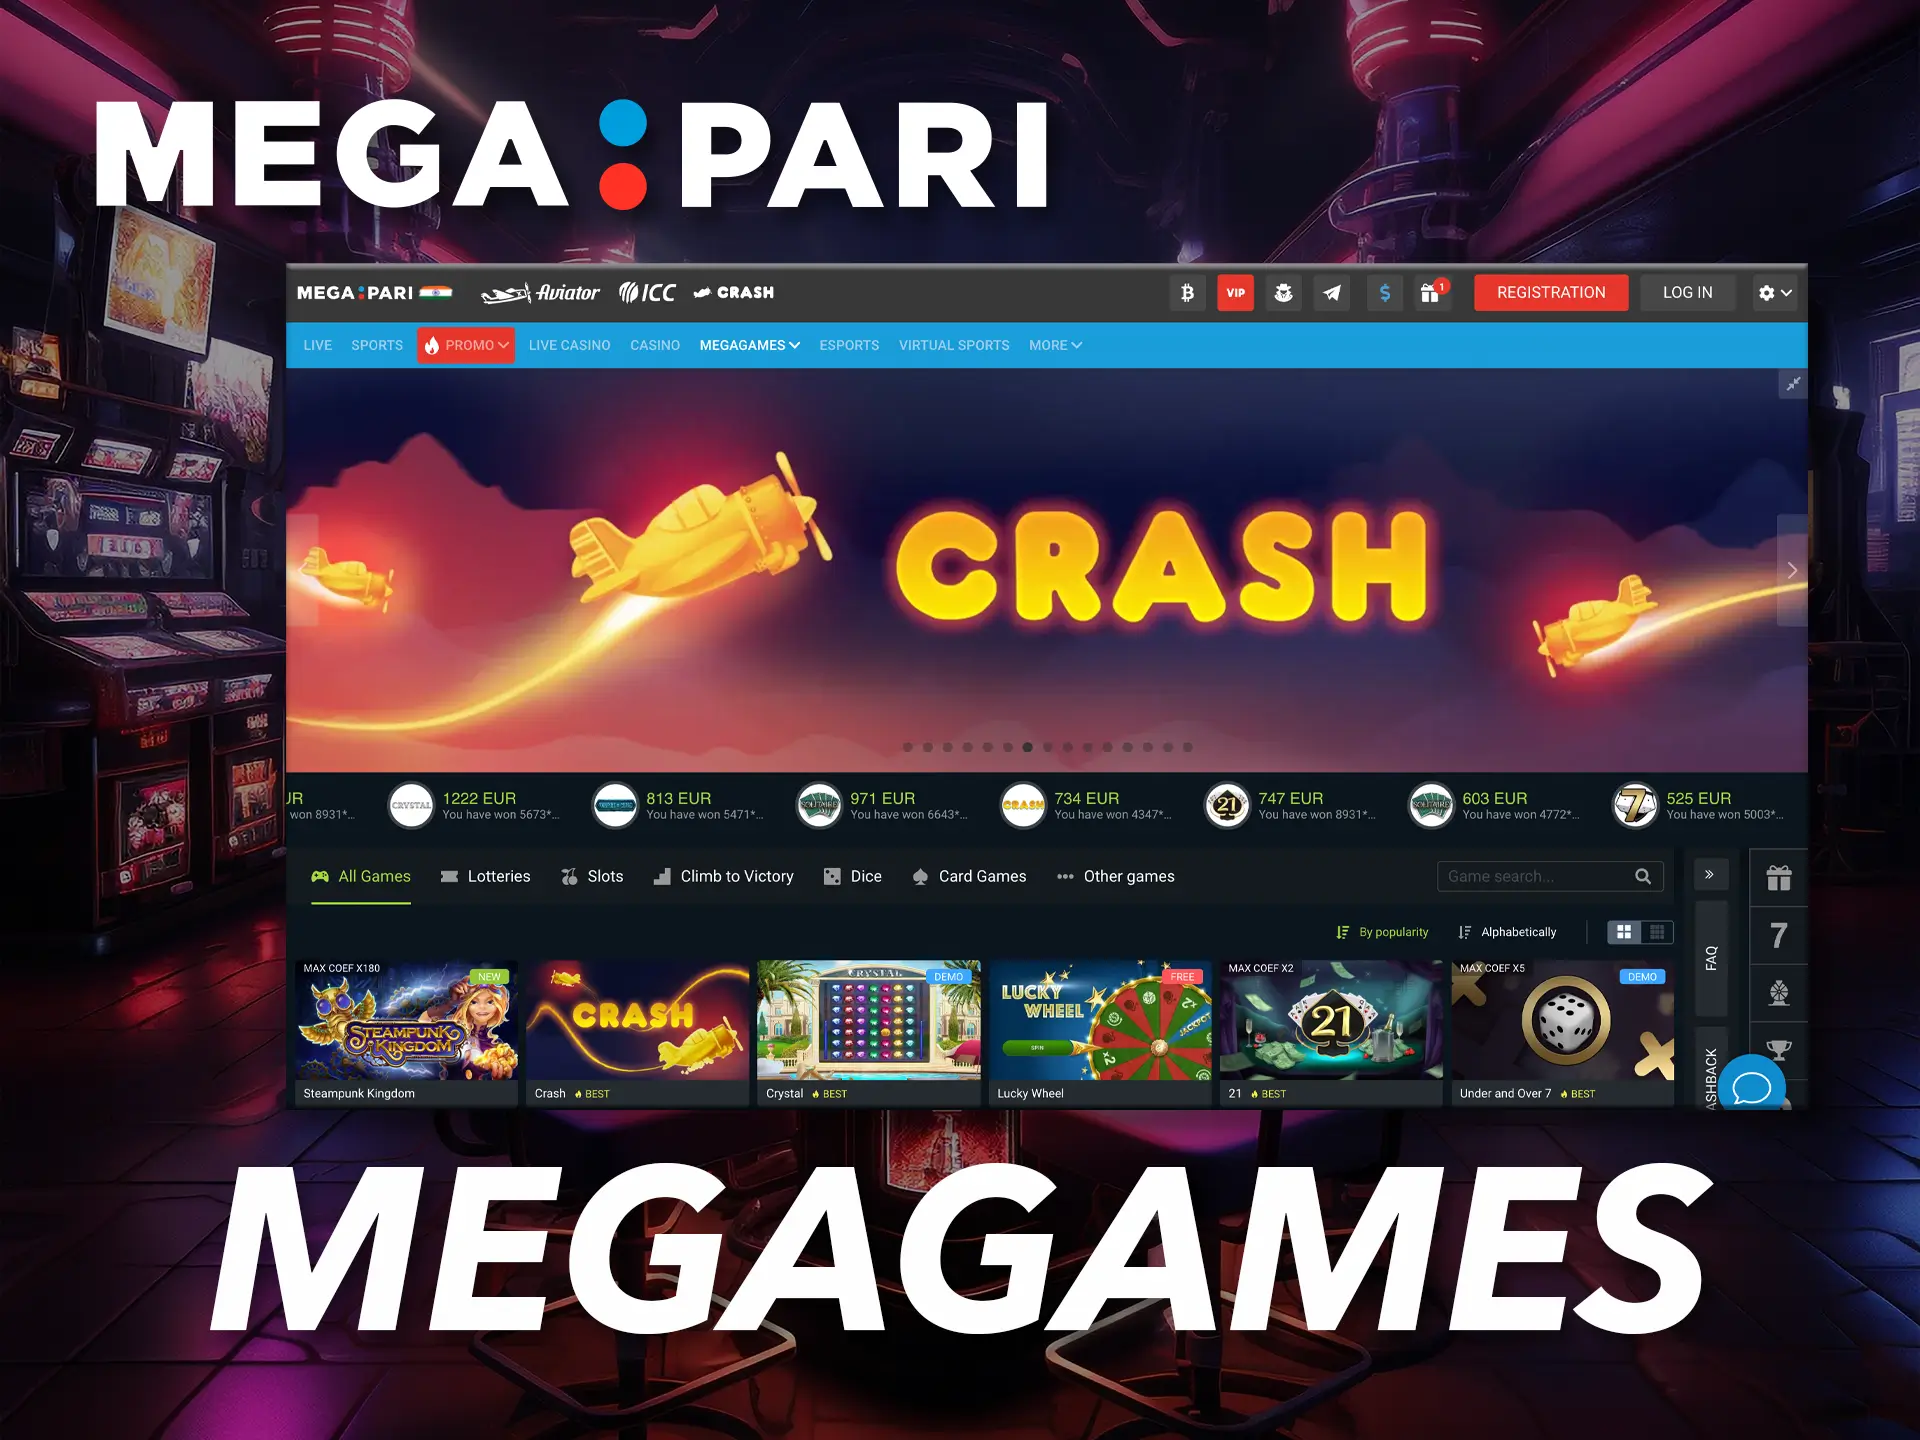 You can find exclusive slots at Megapari.